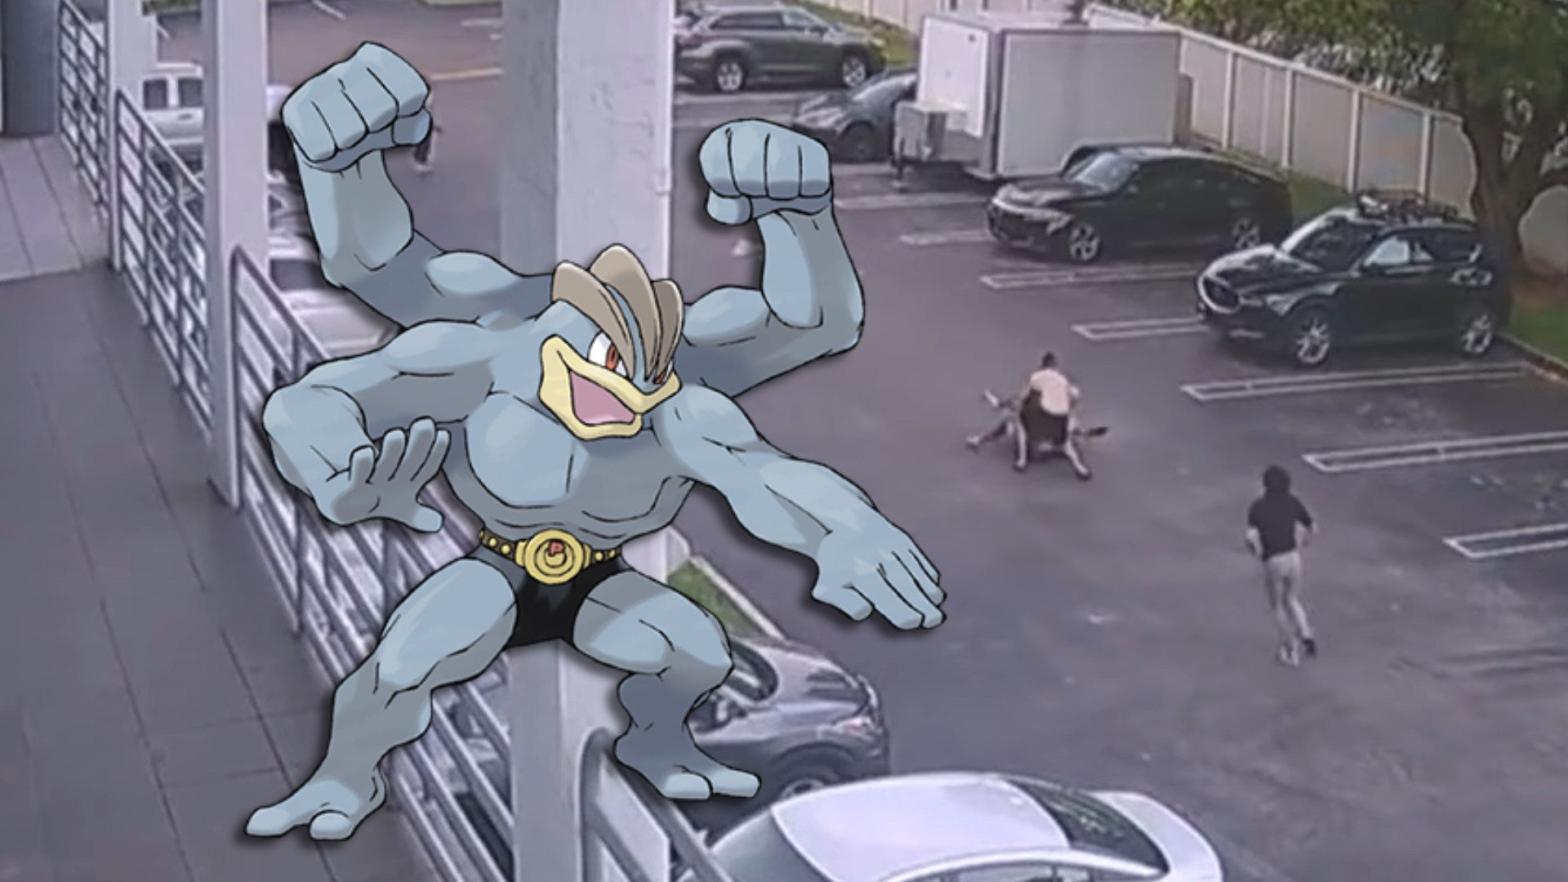 $US40,000 Pokémon Card Thief Thwarted By MMA Fighters